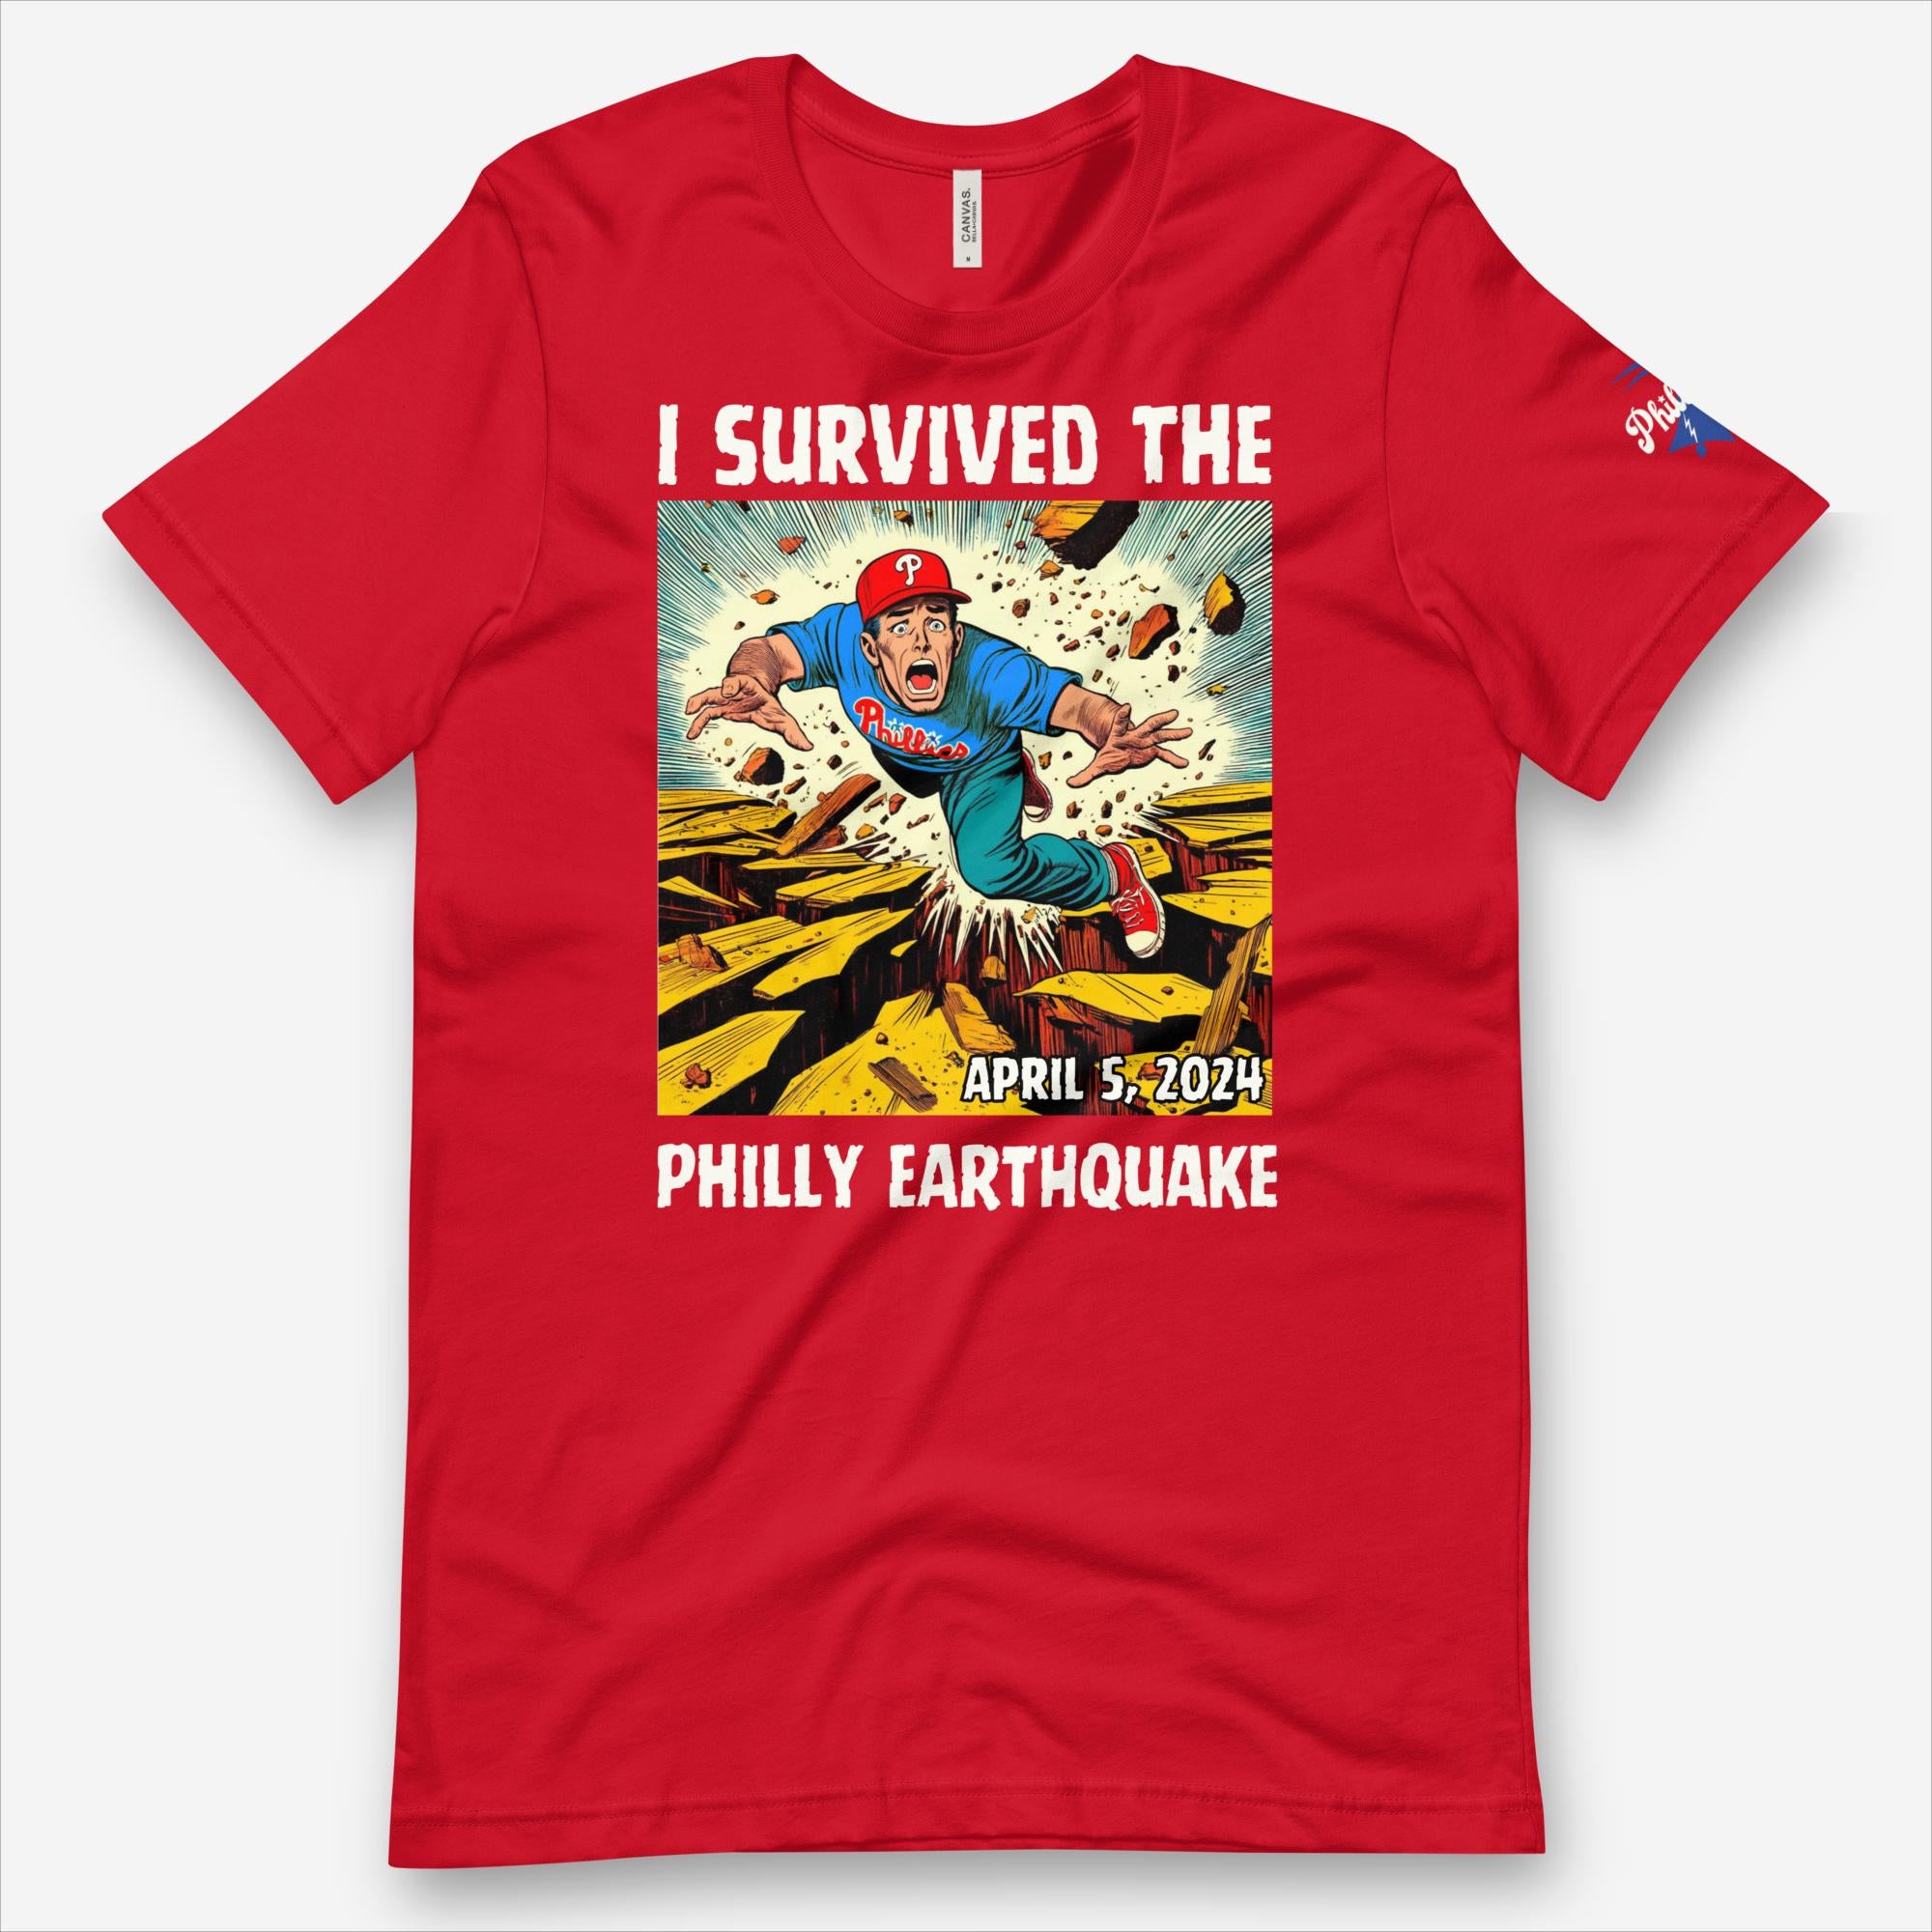 "I Survived the Philly Earthquake" Tee